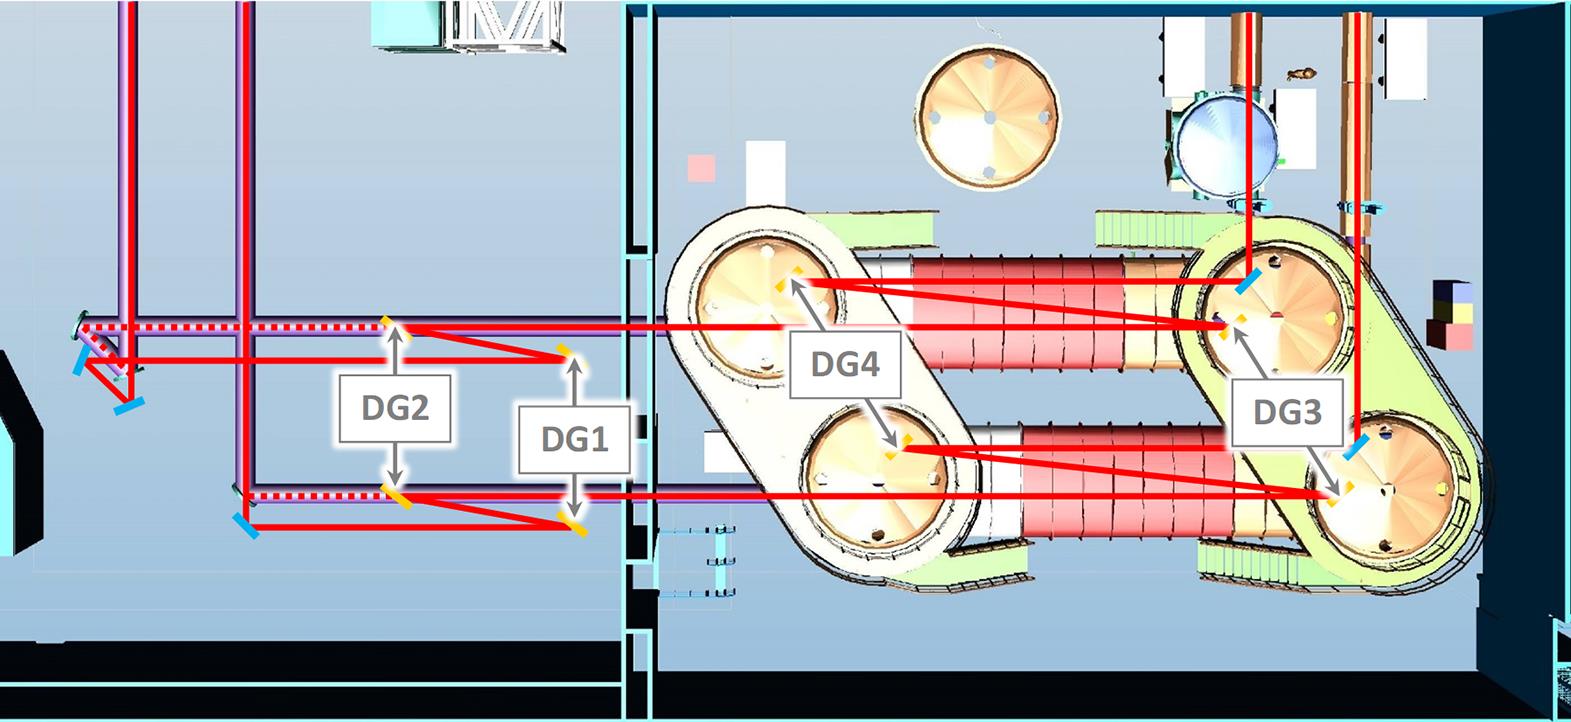 Schematic layout (plan view) of the Laser Hall (left) and Compressor Hall (right), showing the new beam paths and components overlaid on the existing equipment. (Where they differ, the existing beam paths are shown with dashed lines.)